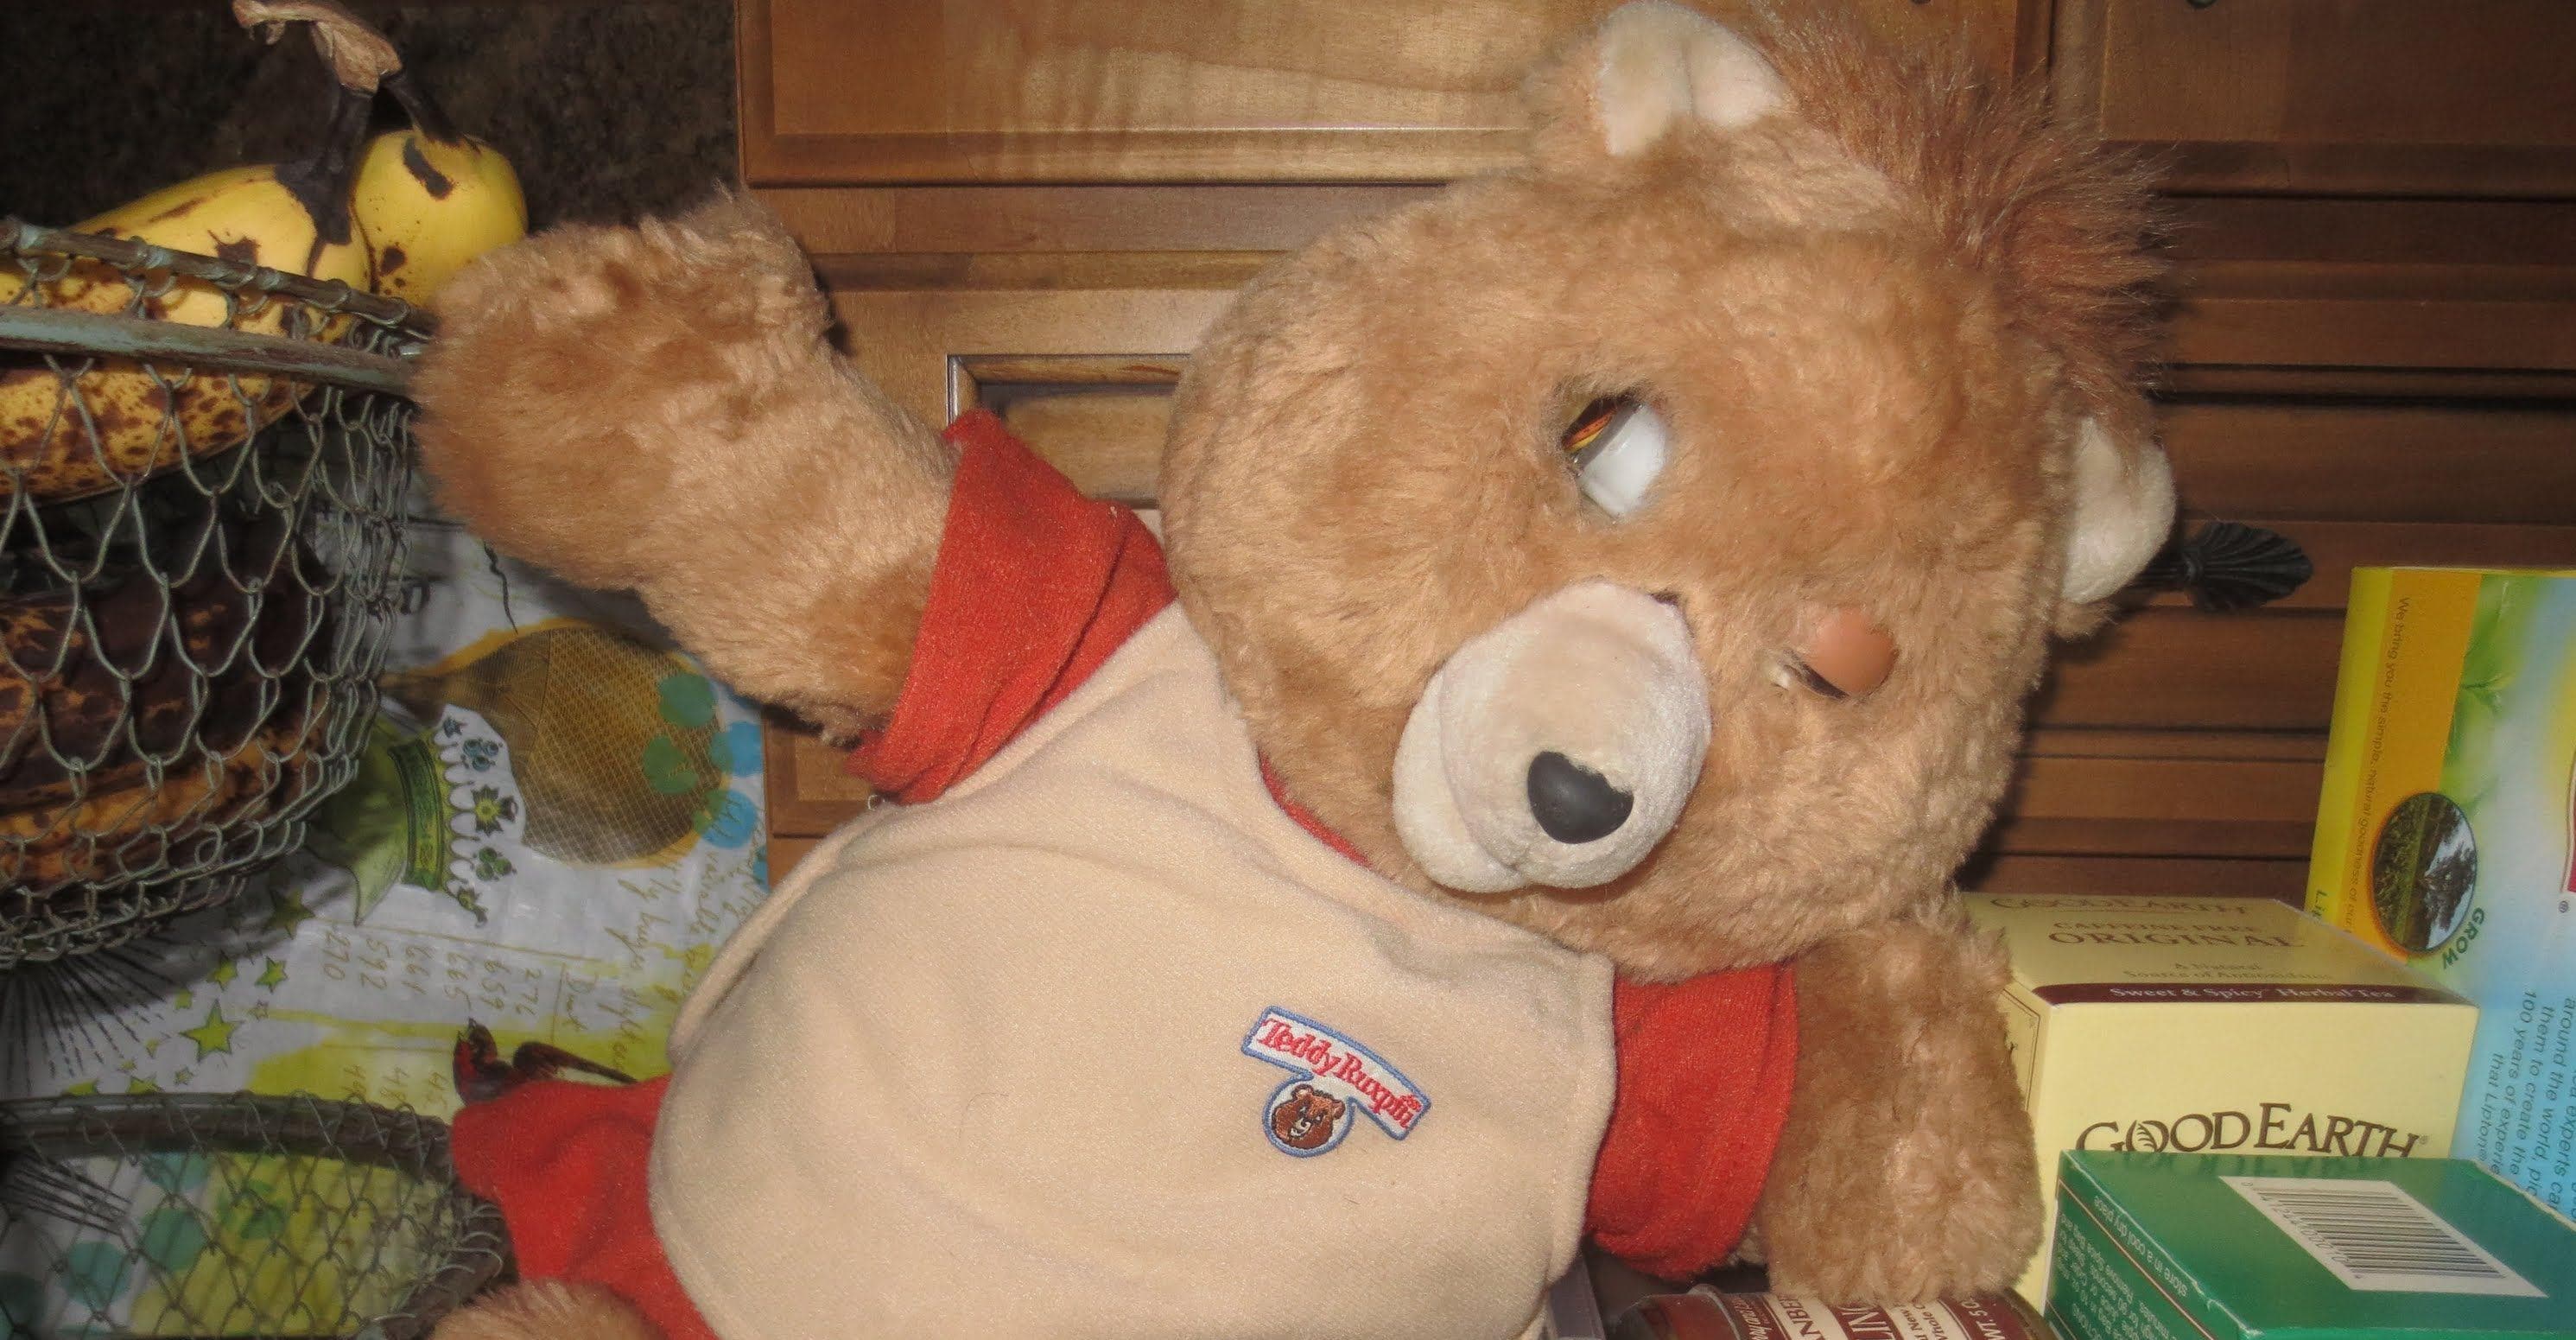 Details about   Vintage Teddy Ruxpin 1985 Talking Plush Bear With Story Cartridges